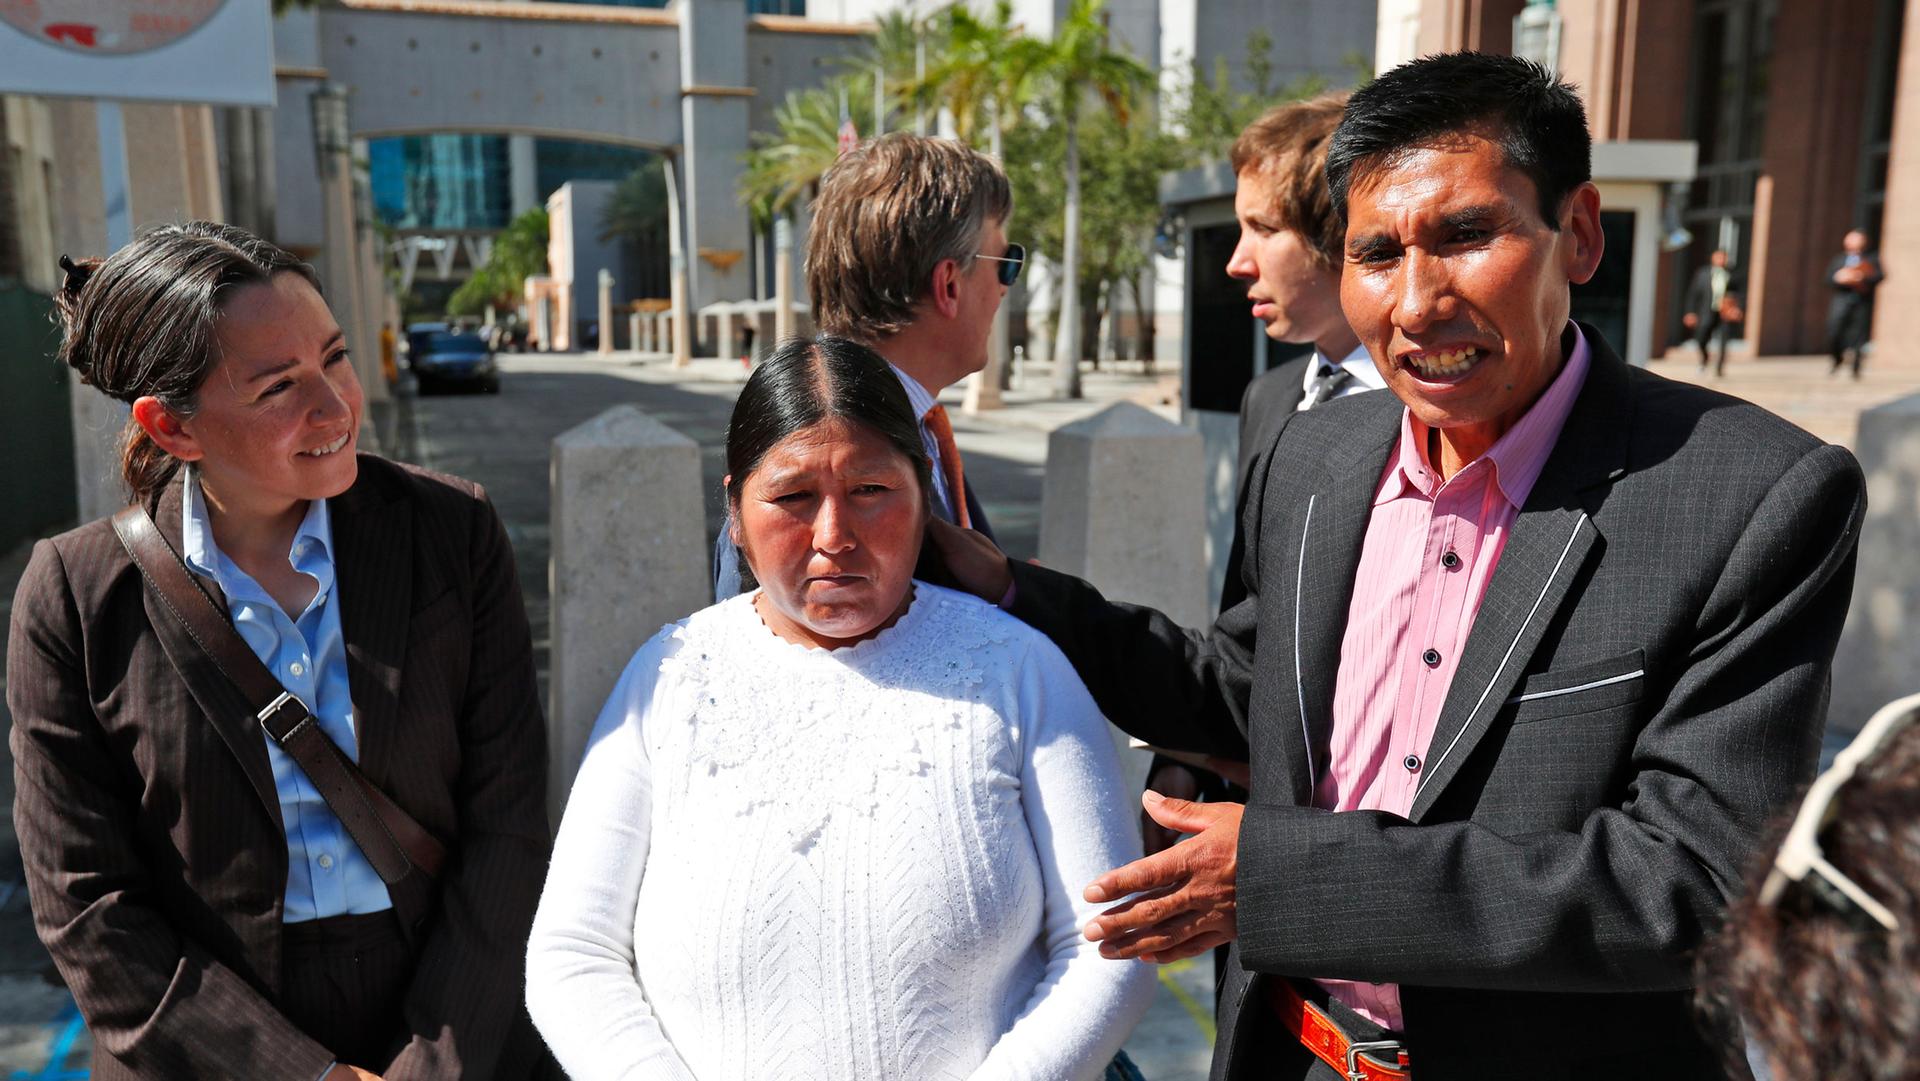 Eloy Rojas Mamani, right, gestures toward his wife Etelvina Ramos Mamani are shown standing next to each other with Eloy wearing a dark suit and Etelvina wearing a white top.